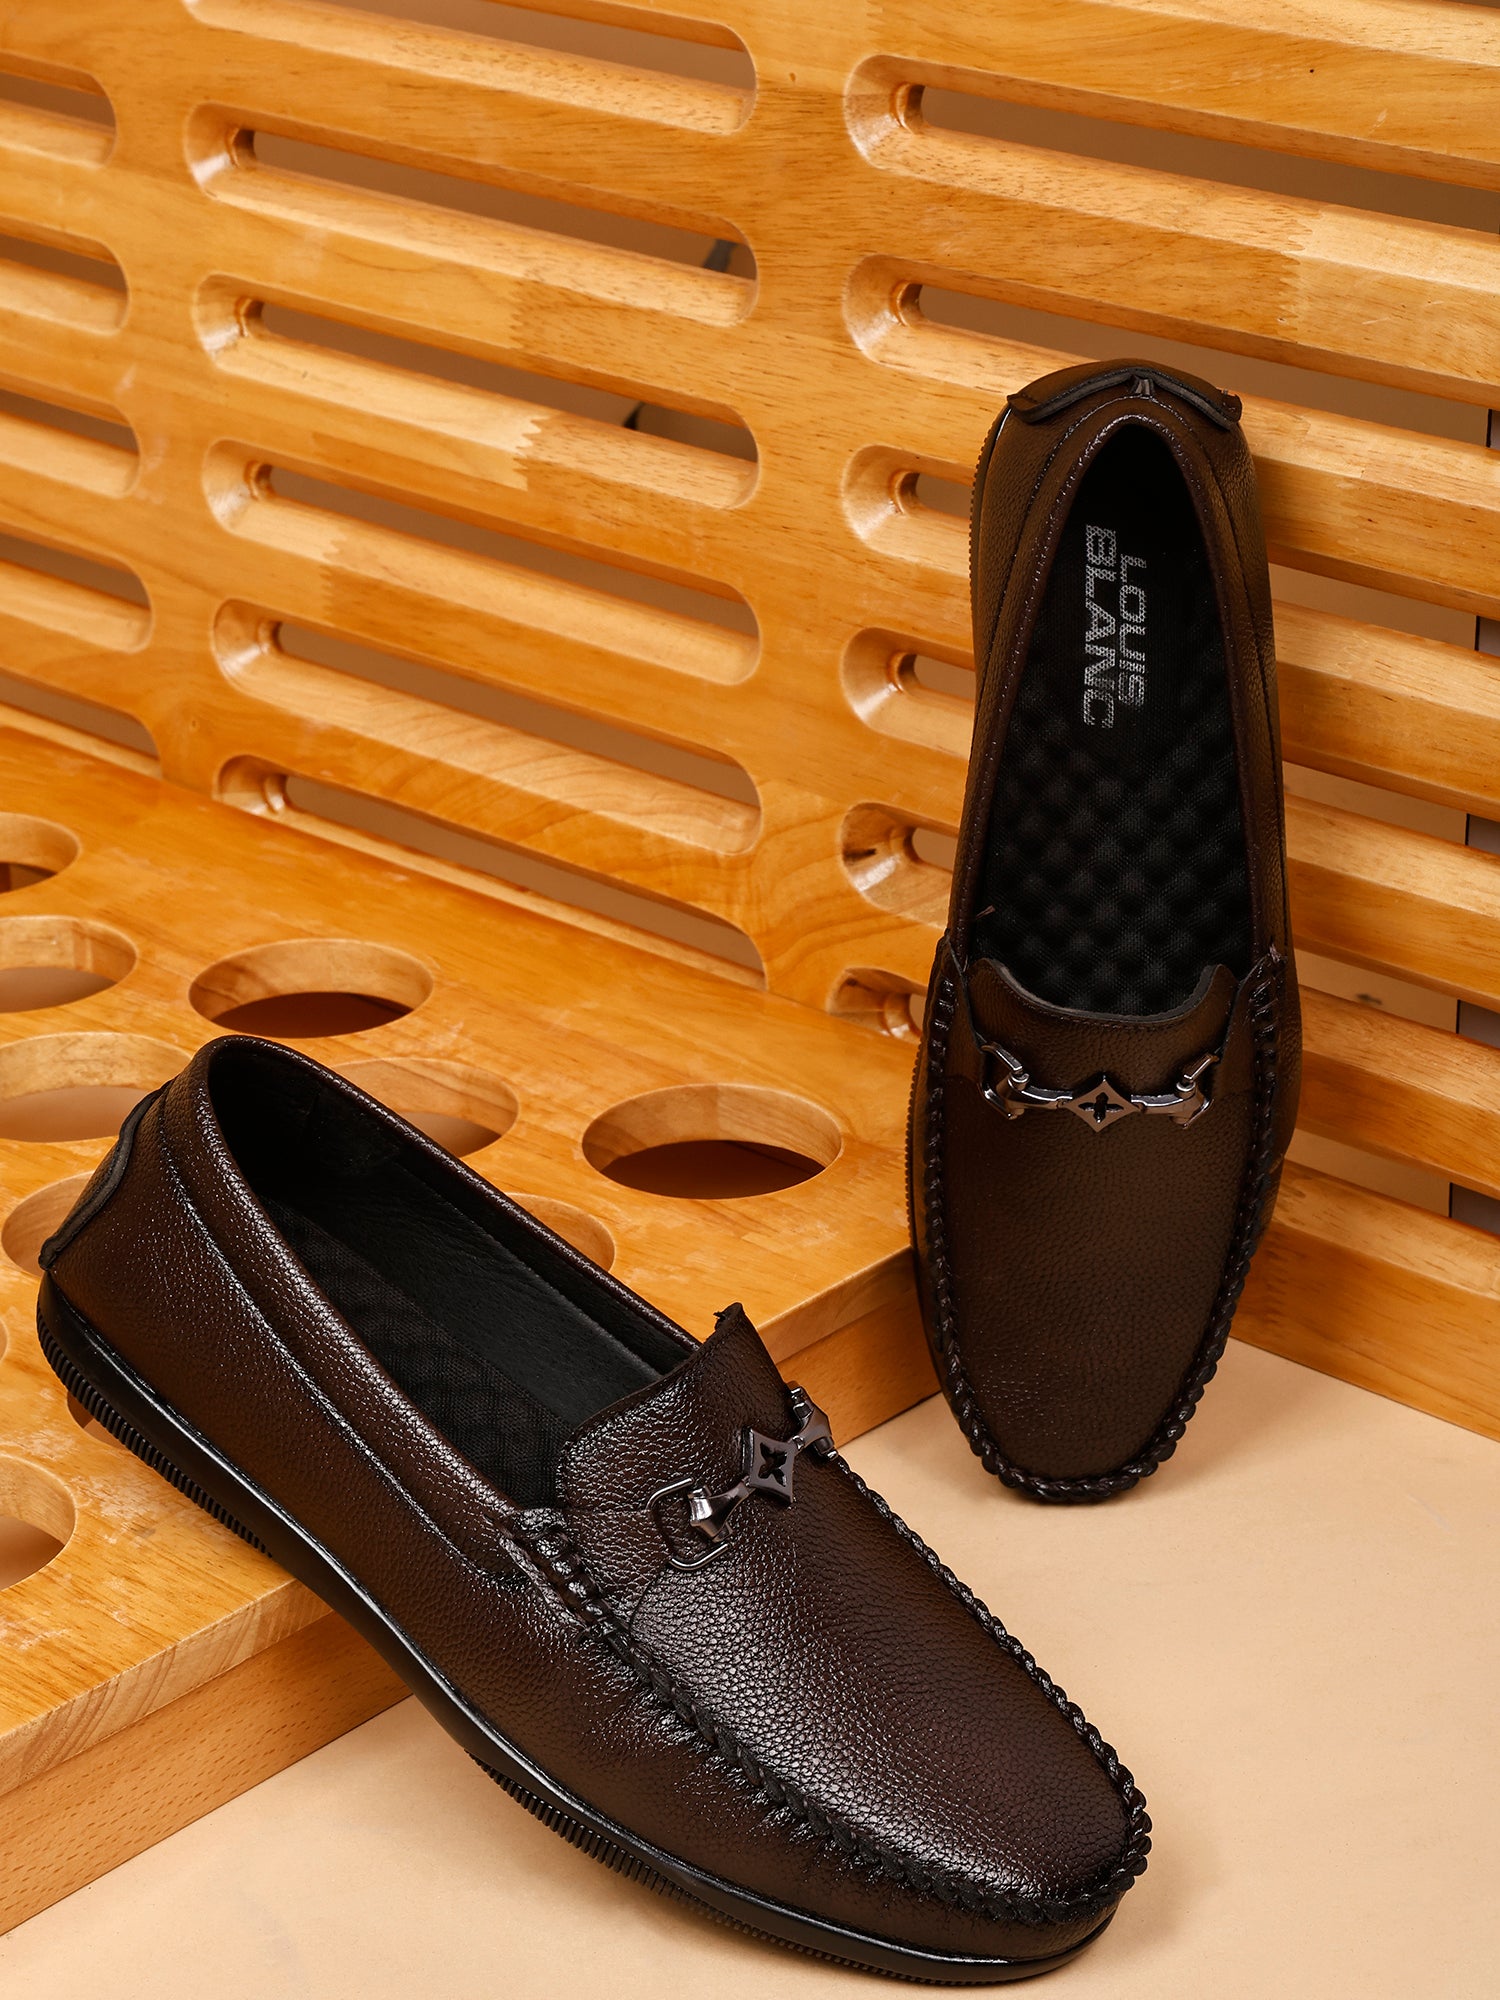 LB 38A Abelmo  Brown Slip On Style Loafer Most Comfortable Doctor Insole With Wrinkle Free Fox Leather Loafers.